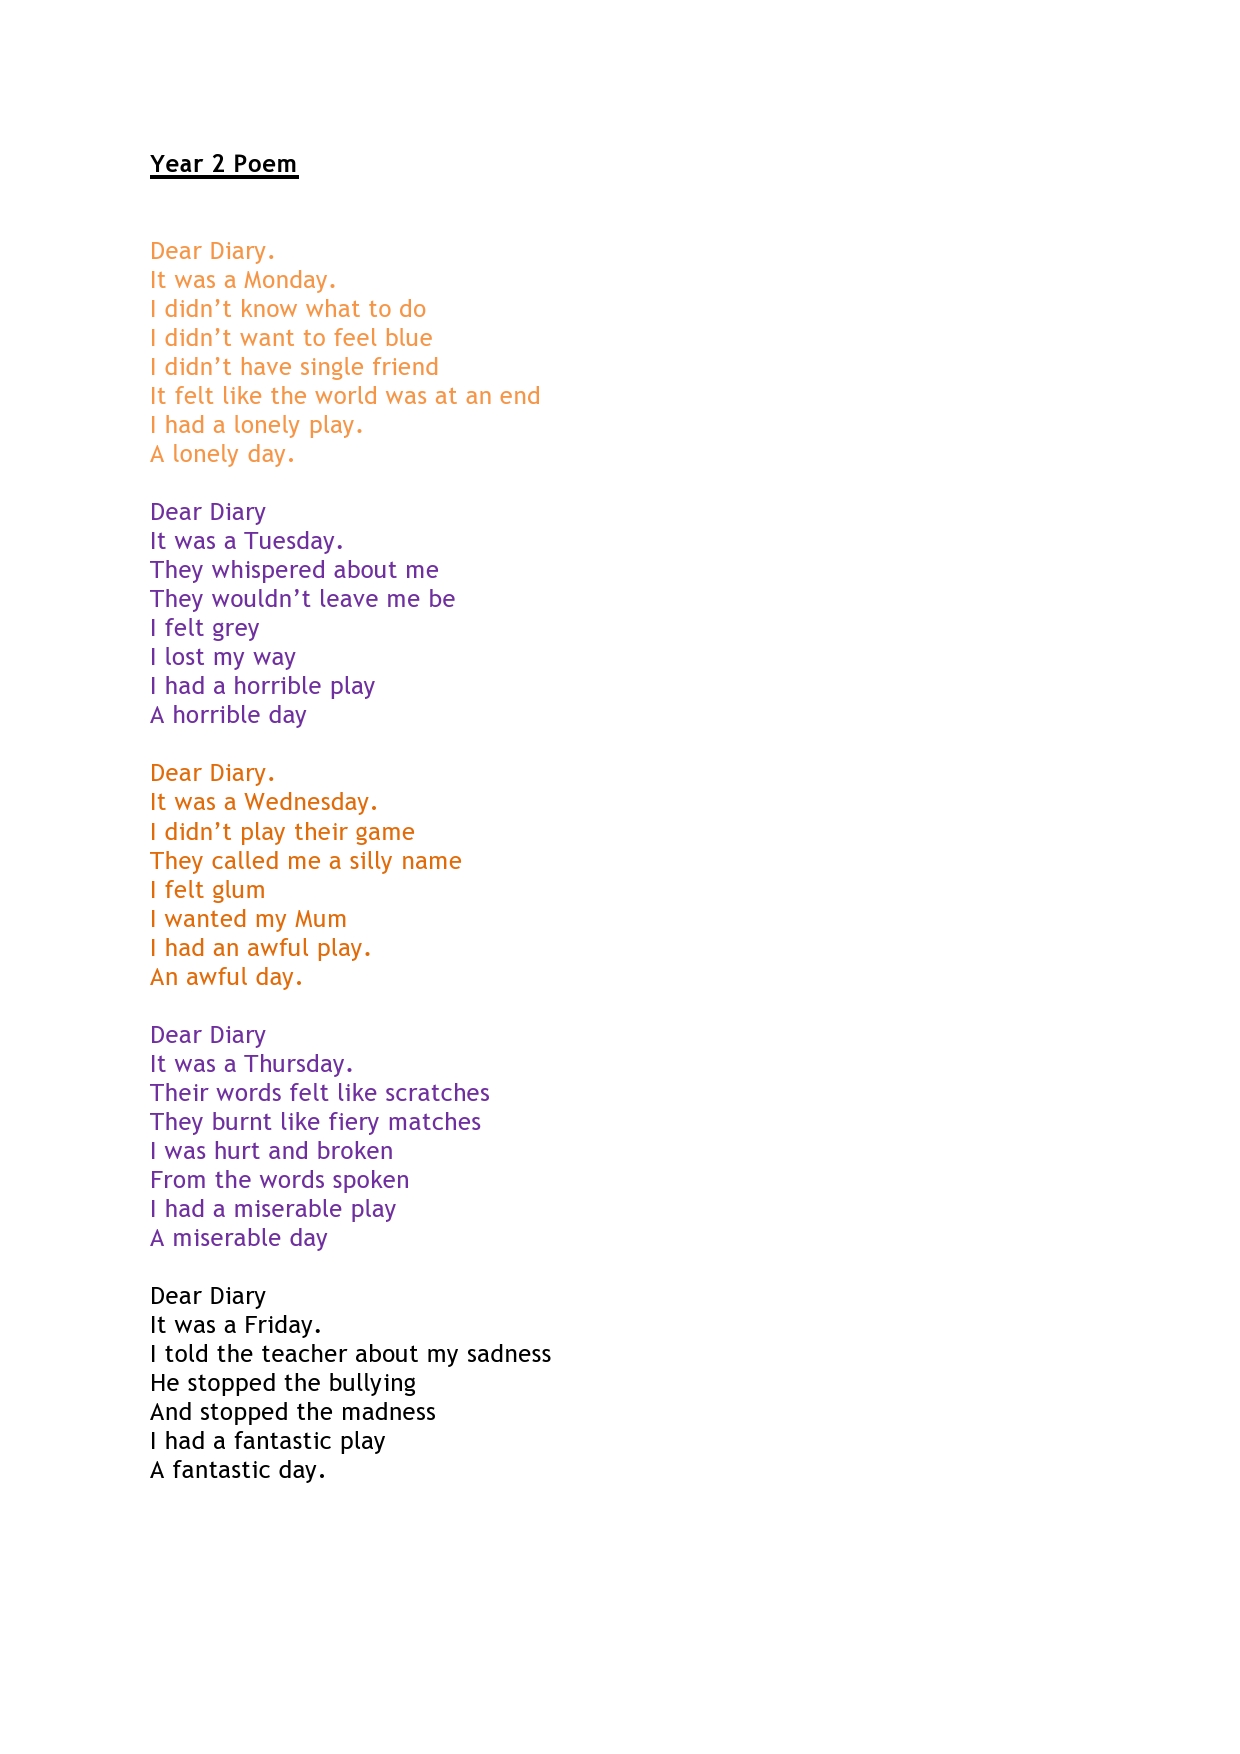 Year 2 Poem adapted-page0001.jpg